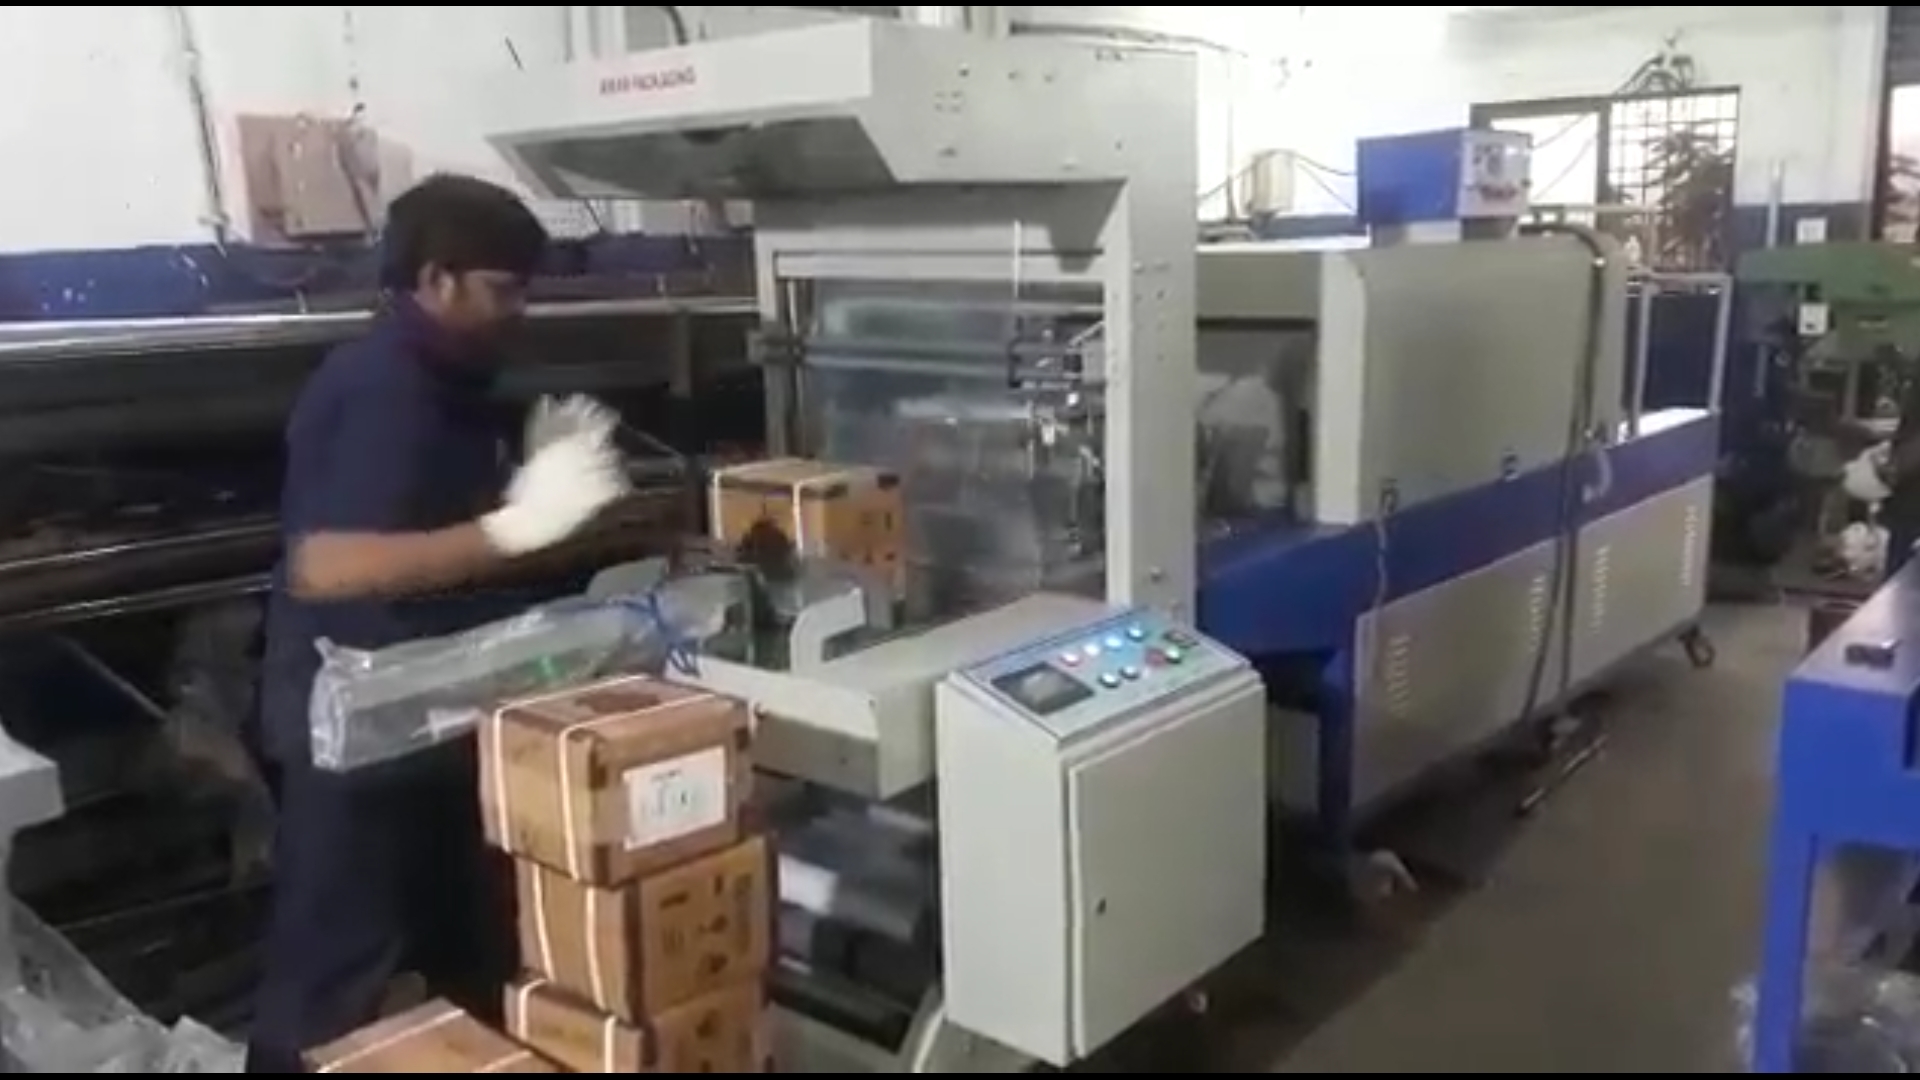 Semi - Automatic Web Sealer with Shrink Wrapping Machine